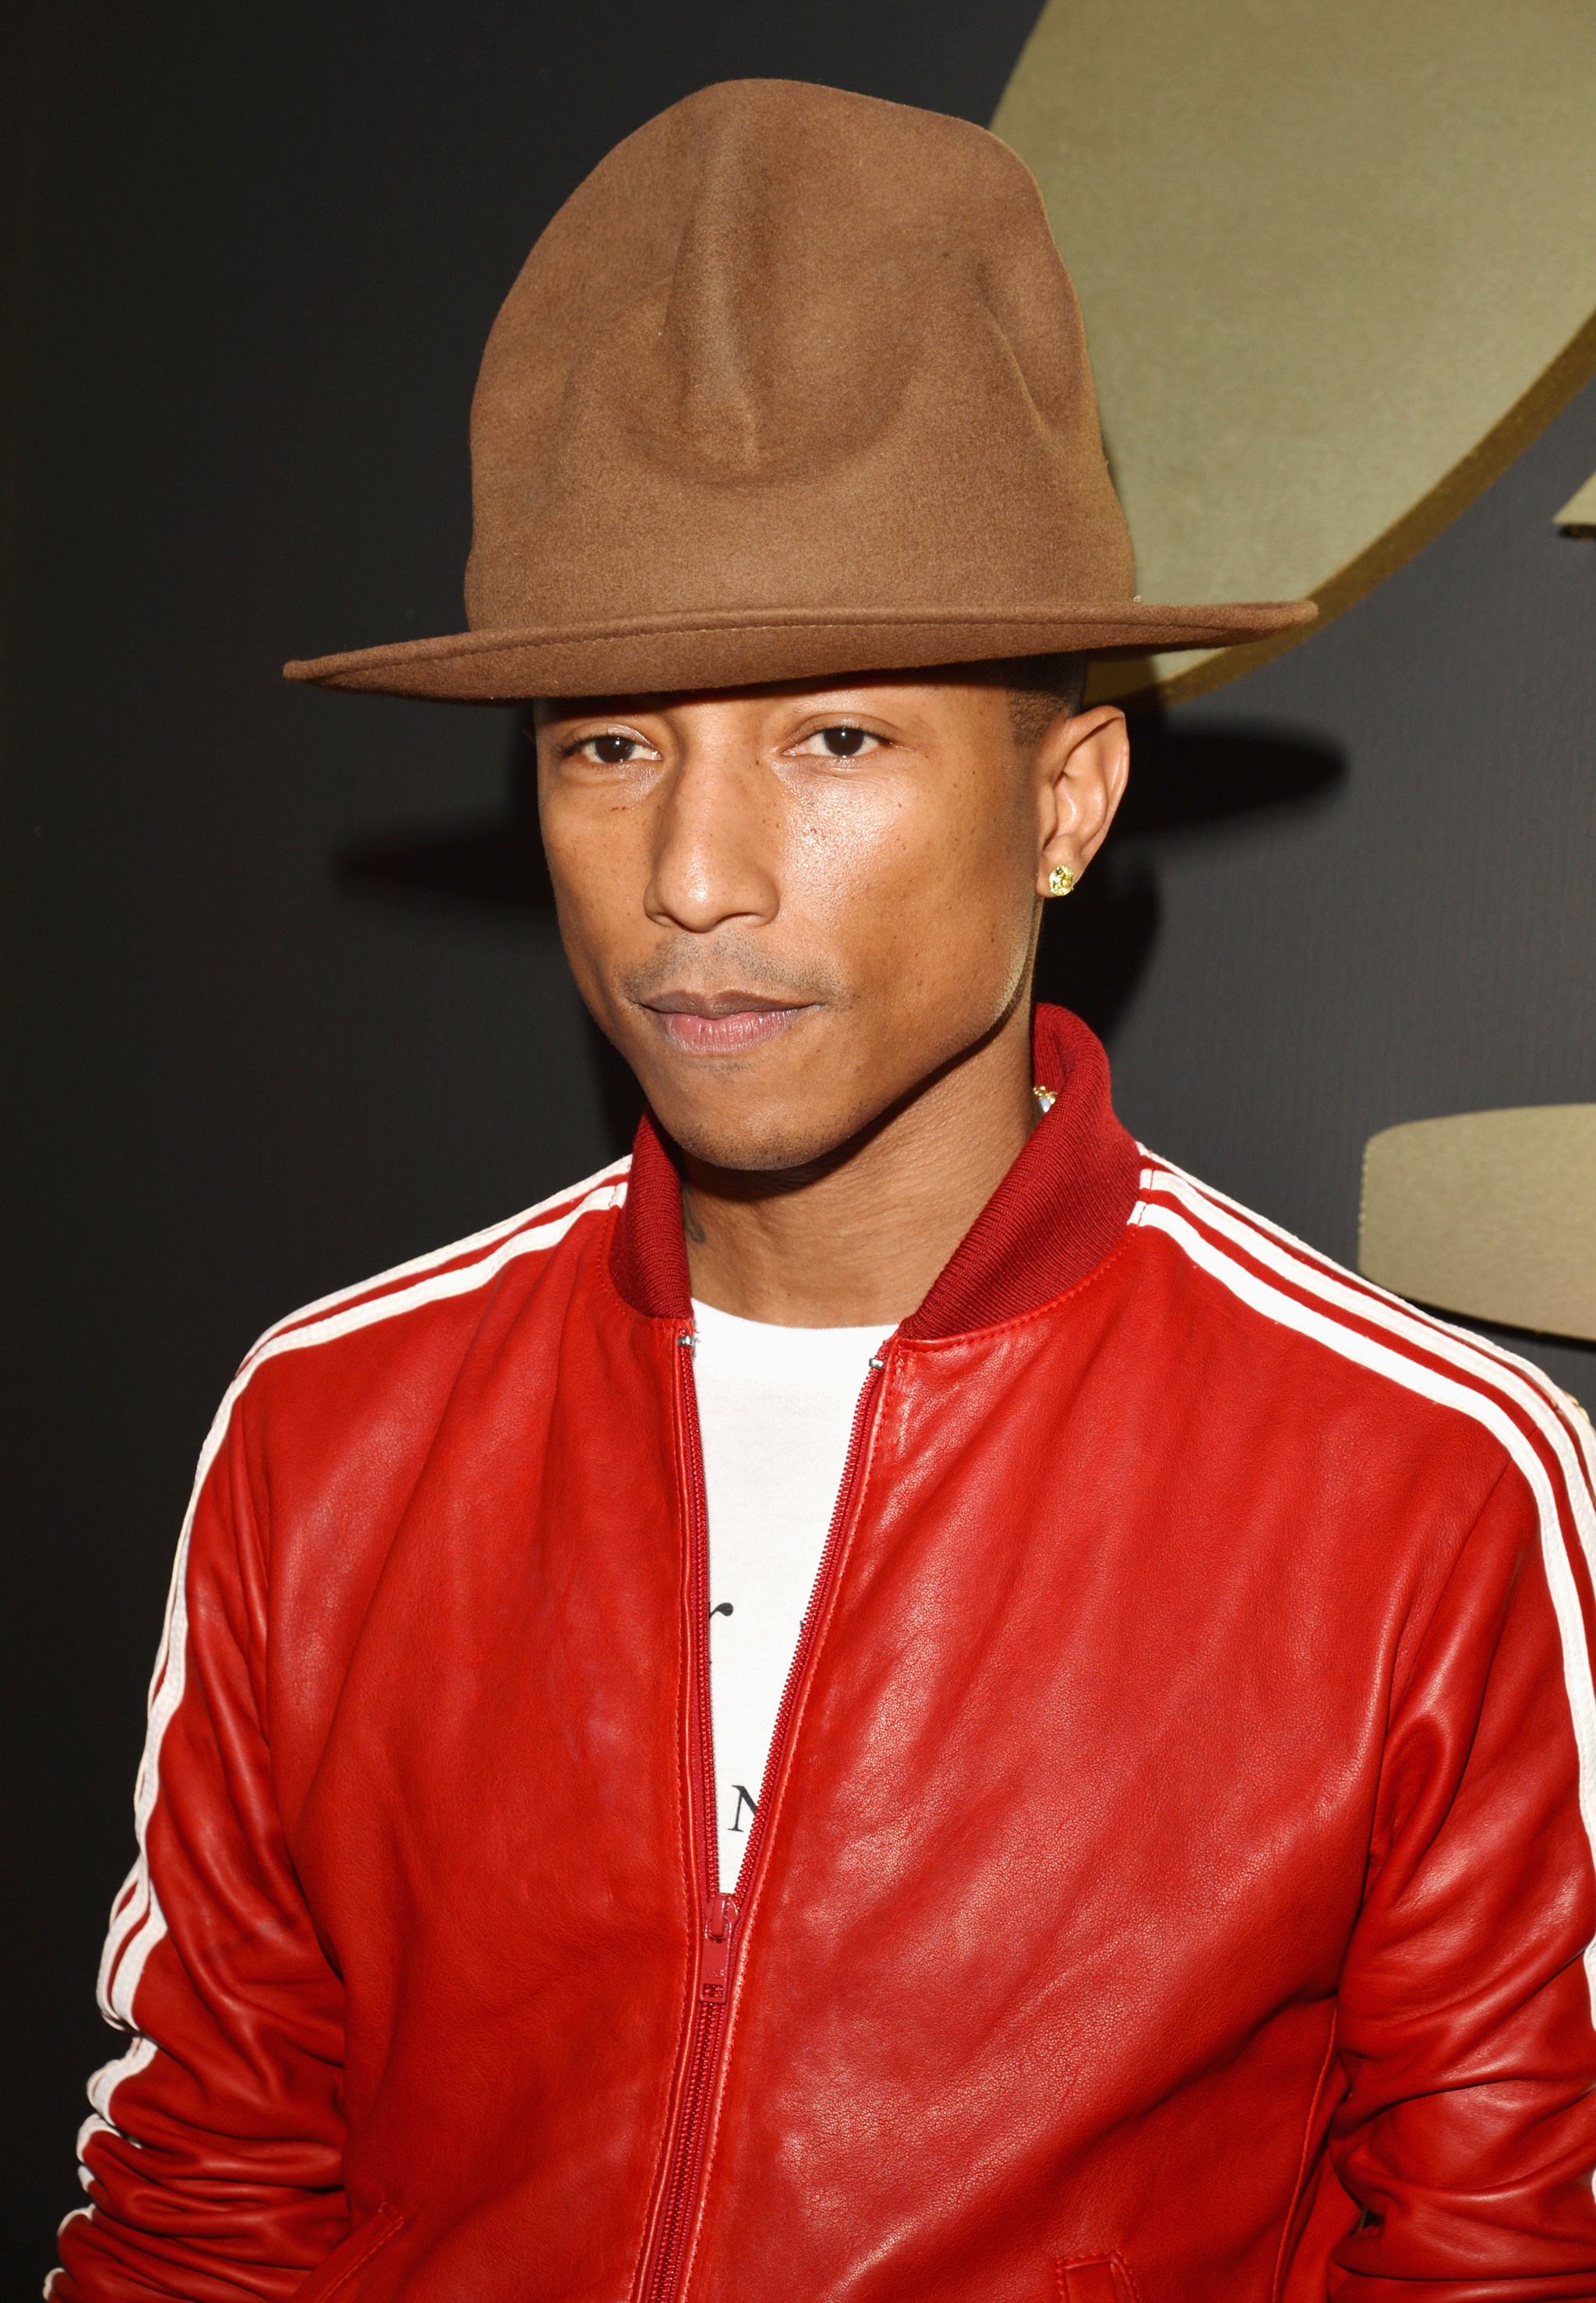 HD wallpaper, Pharrell Williams, 2050X2960 Hd Phone, Phone Hd Pharrell Williams Background Photo, Digital Artistry, Inspiring Quotes, Eclectic Wallpapers